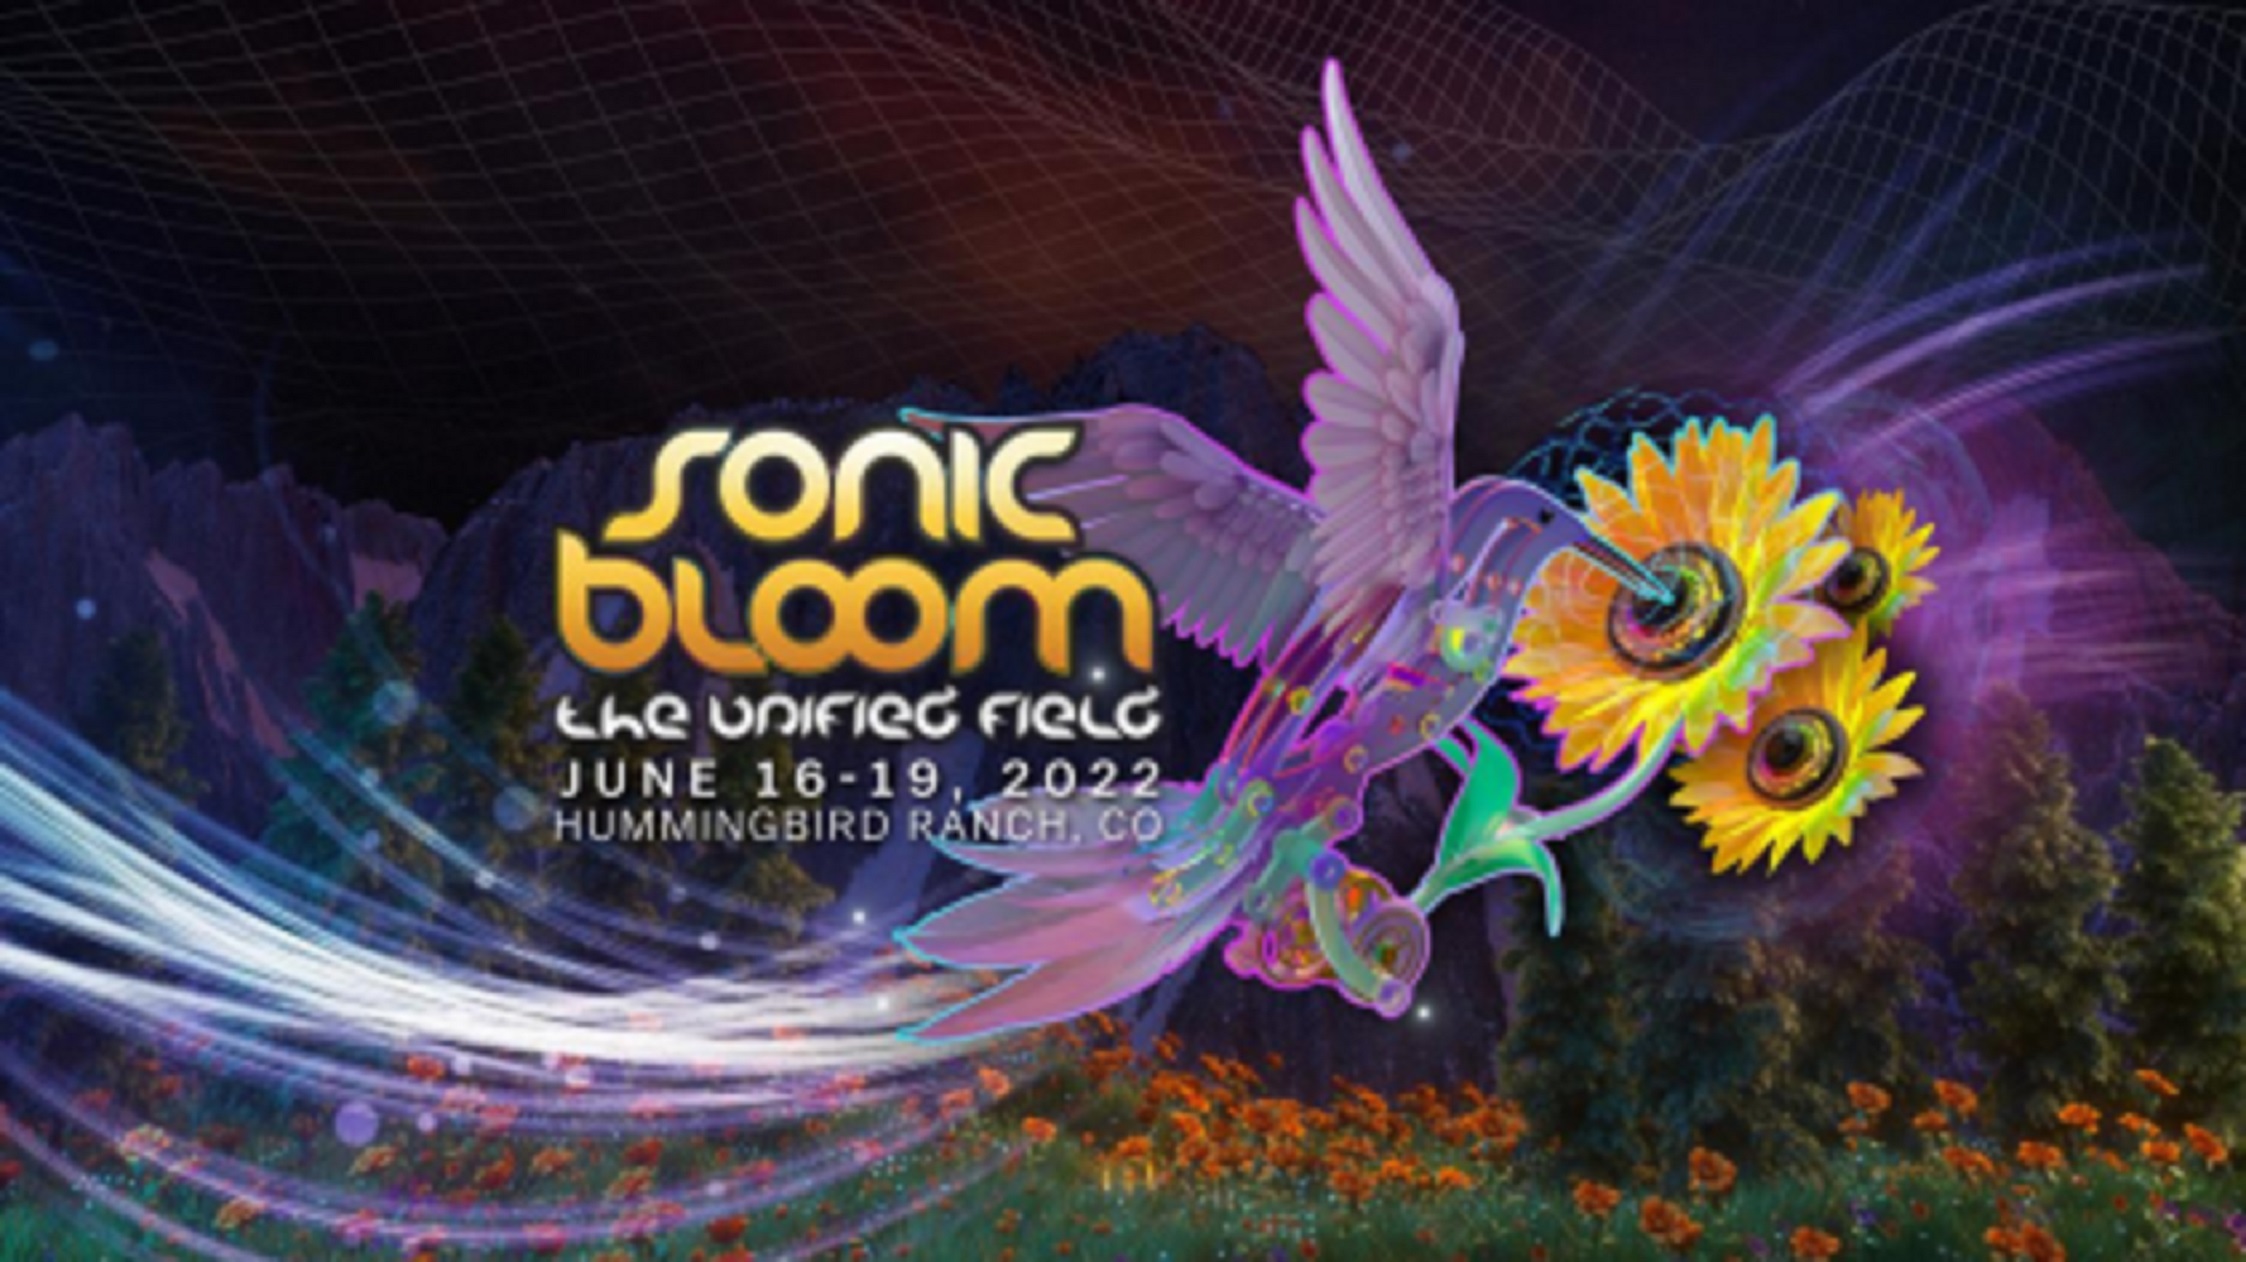 The 15th Annual SONIC BLOOM Announces 2022 Festival & Musical Artists!